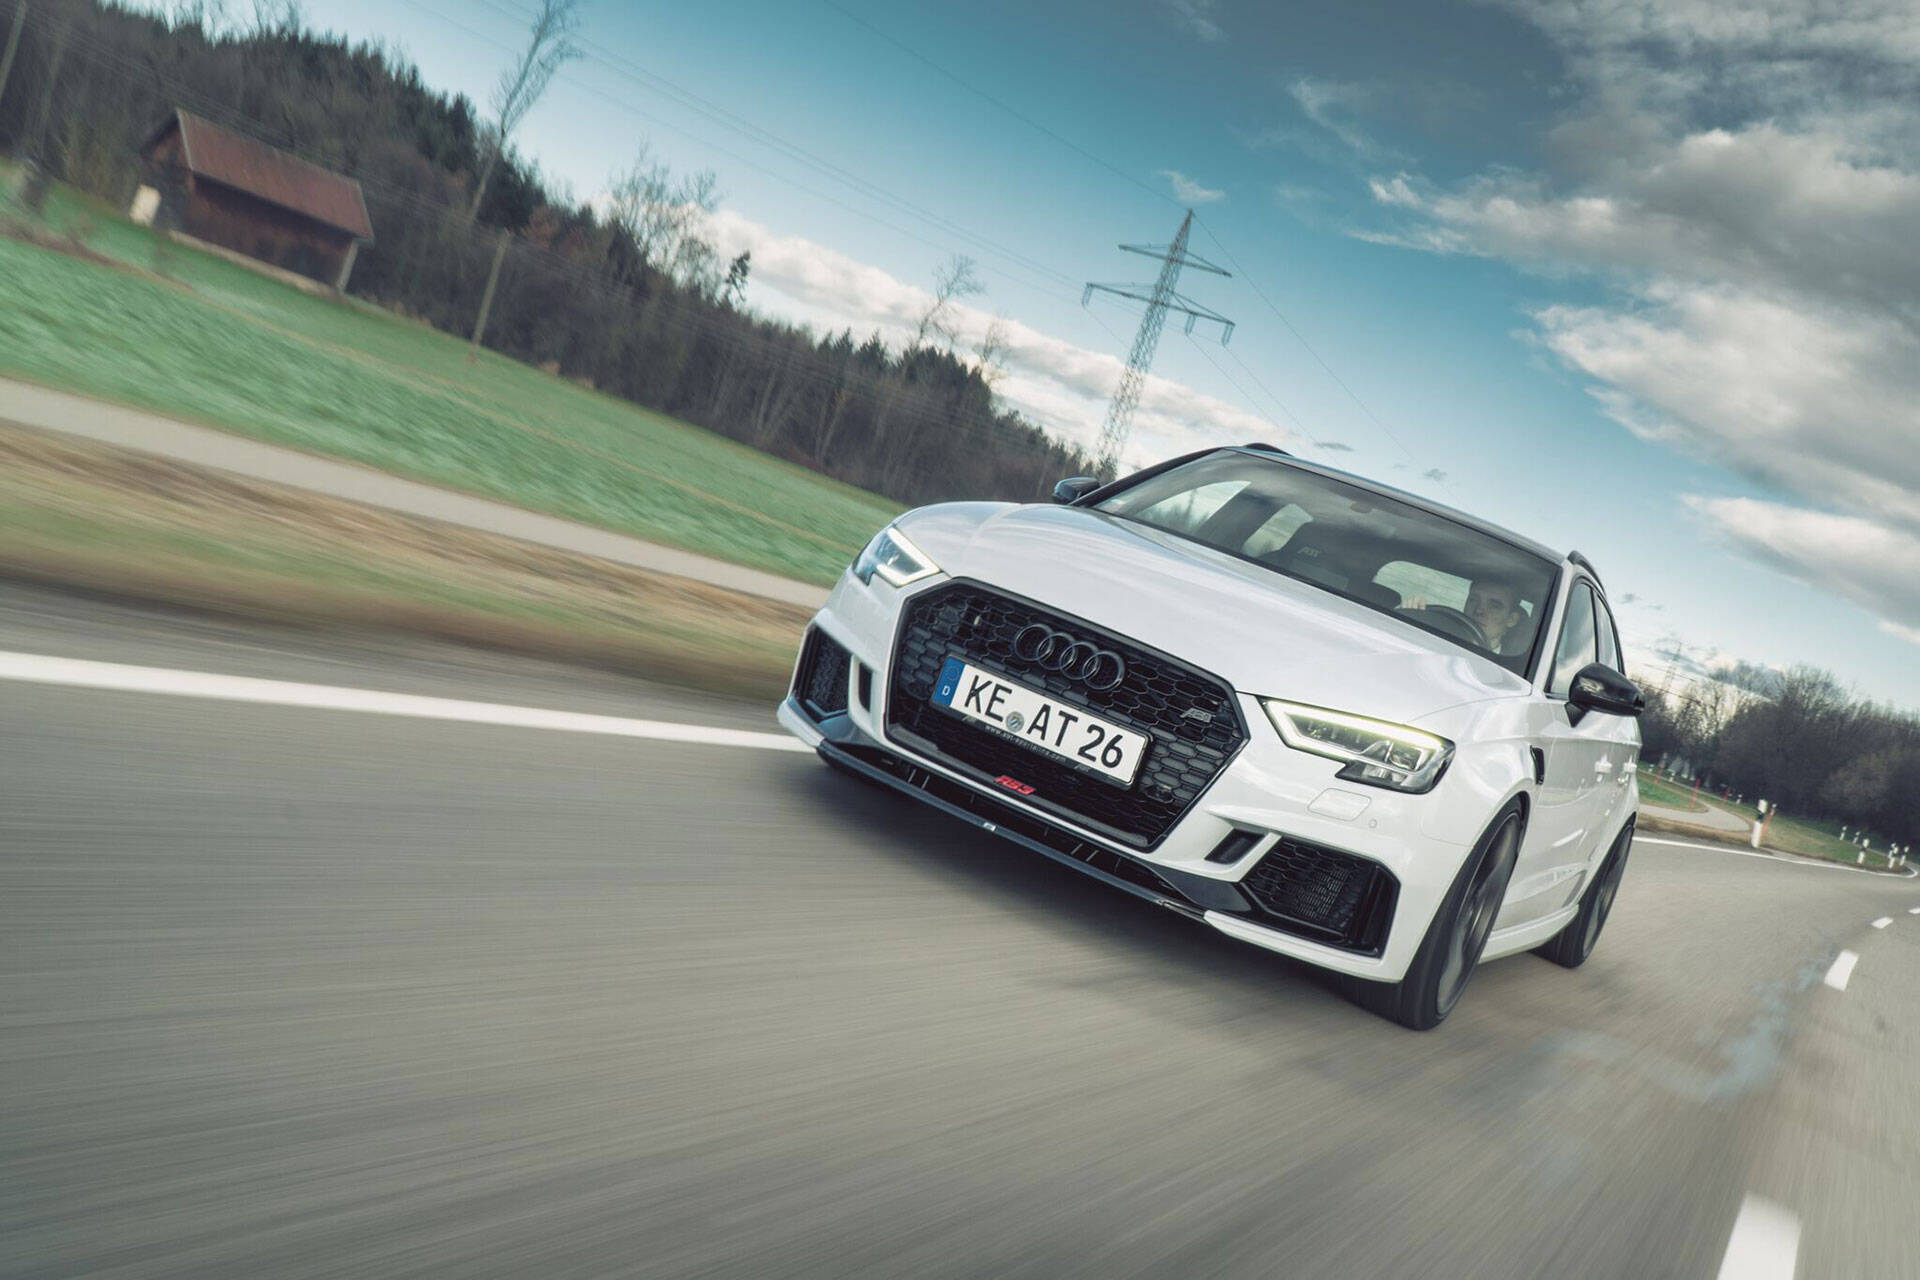 Compact class with world-class tuning: the ABT RS3 with 500 HP - Audi Tuning,  VW Tuning, Chiptuning von ABT Sportsline.